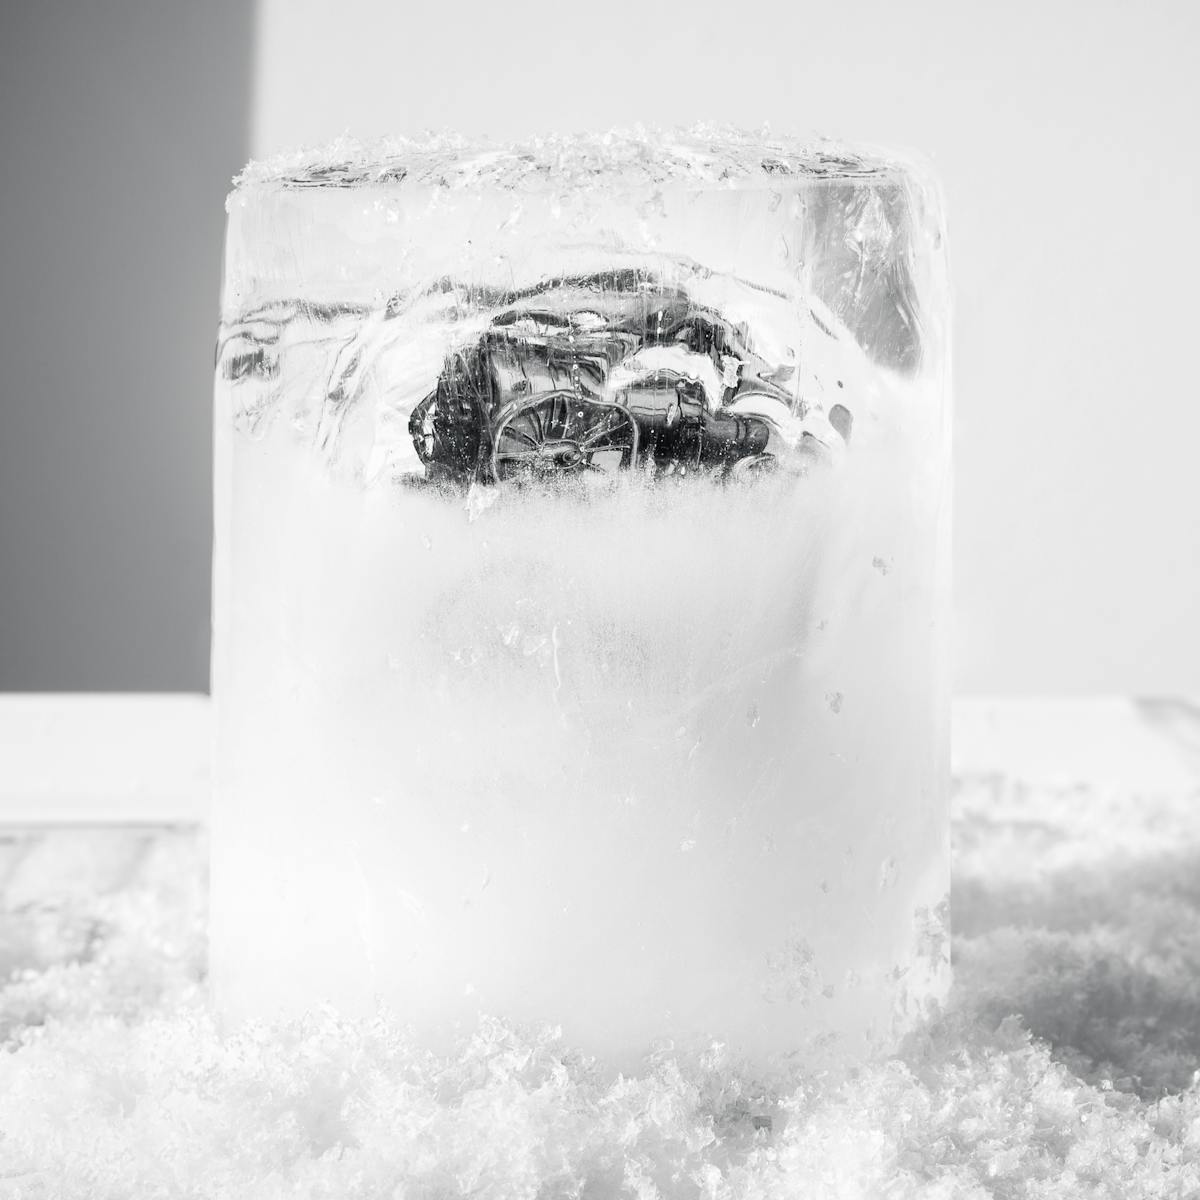 Monotone photograph showing a cylindrical core of frozen water. Encased within the ice is an illustration of a traction steam engine from the 1800s that can just be seen through the distortions of the ice wall and opaque frosting. The ice core is standing vertically on fridge freezer shelf, surrounded by a piles of light frosted snow.